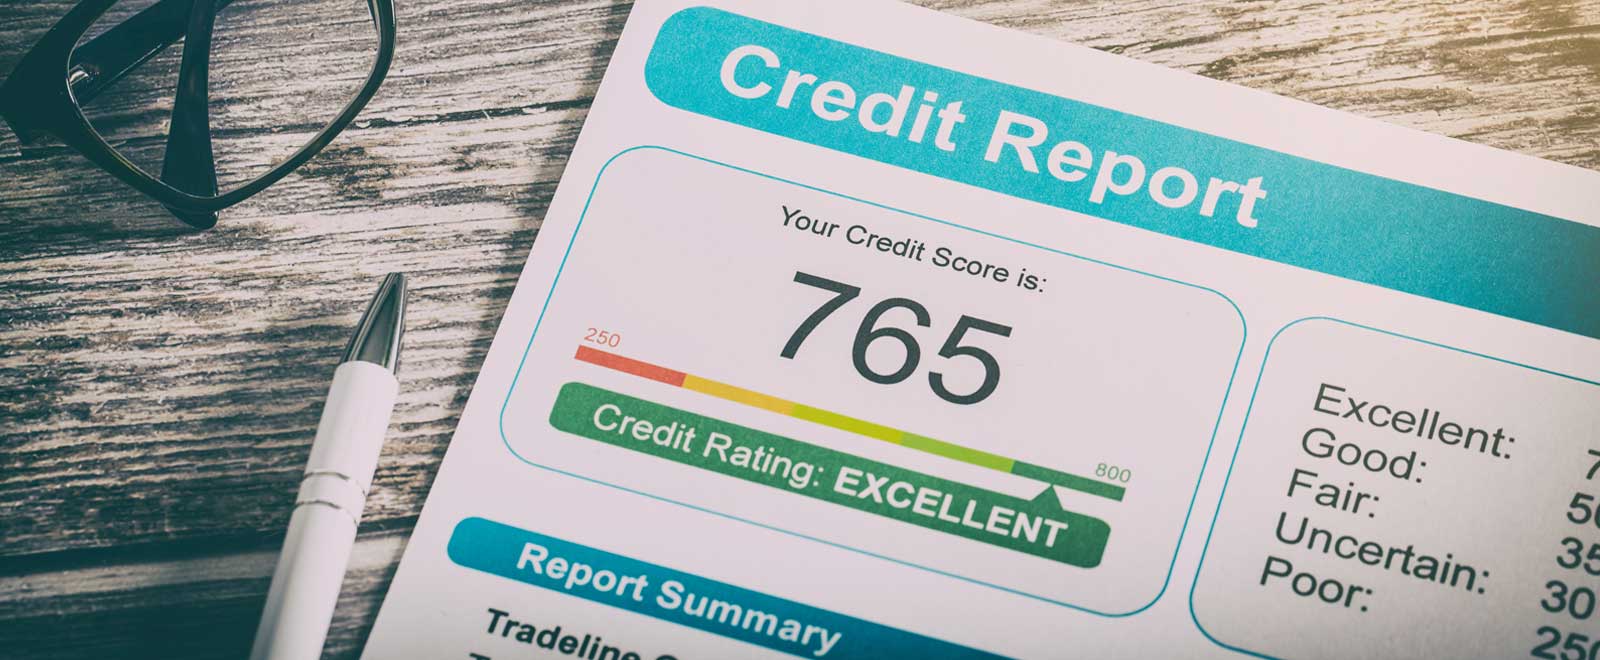 A credit report with a credit score of 765.
